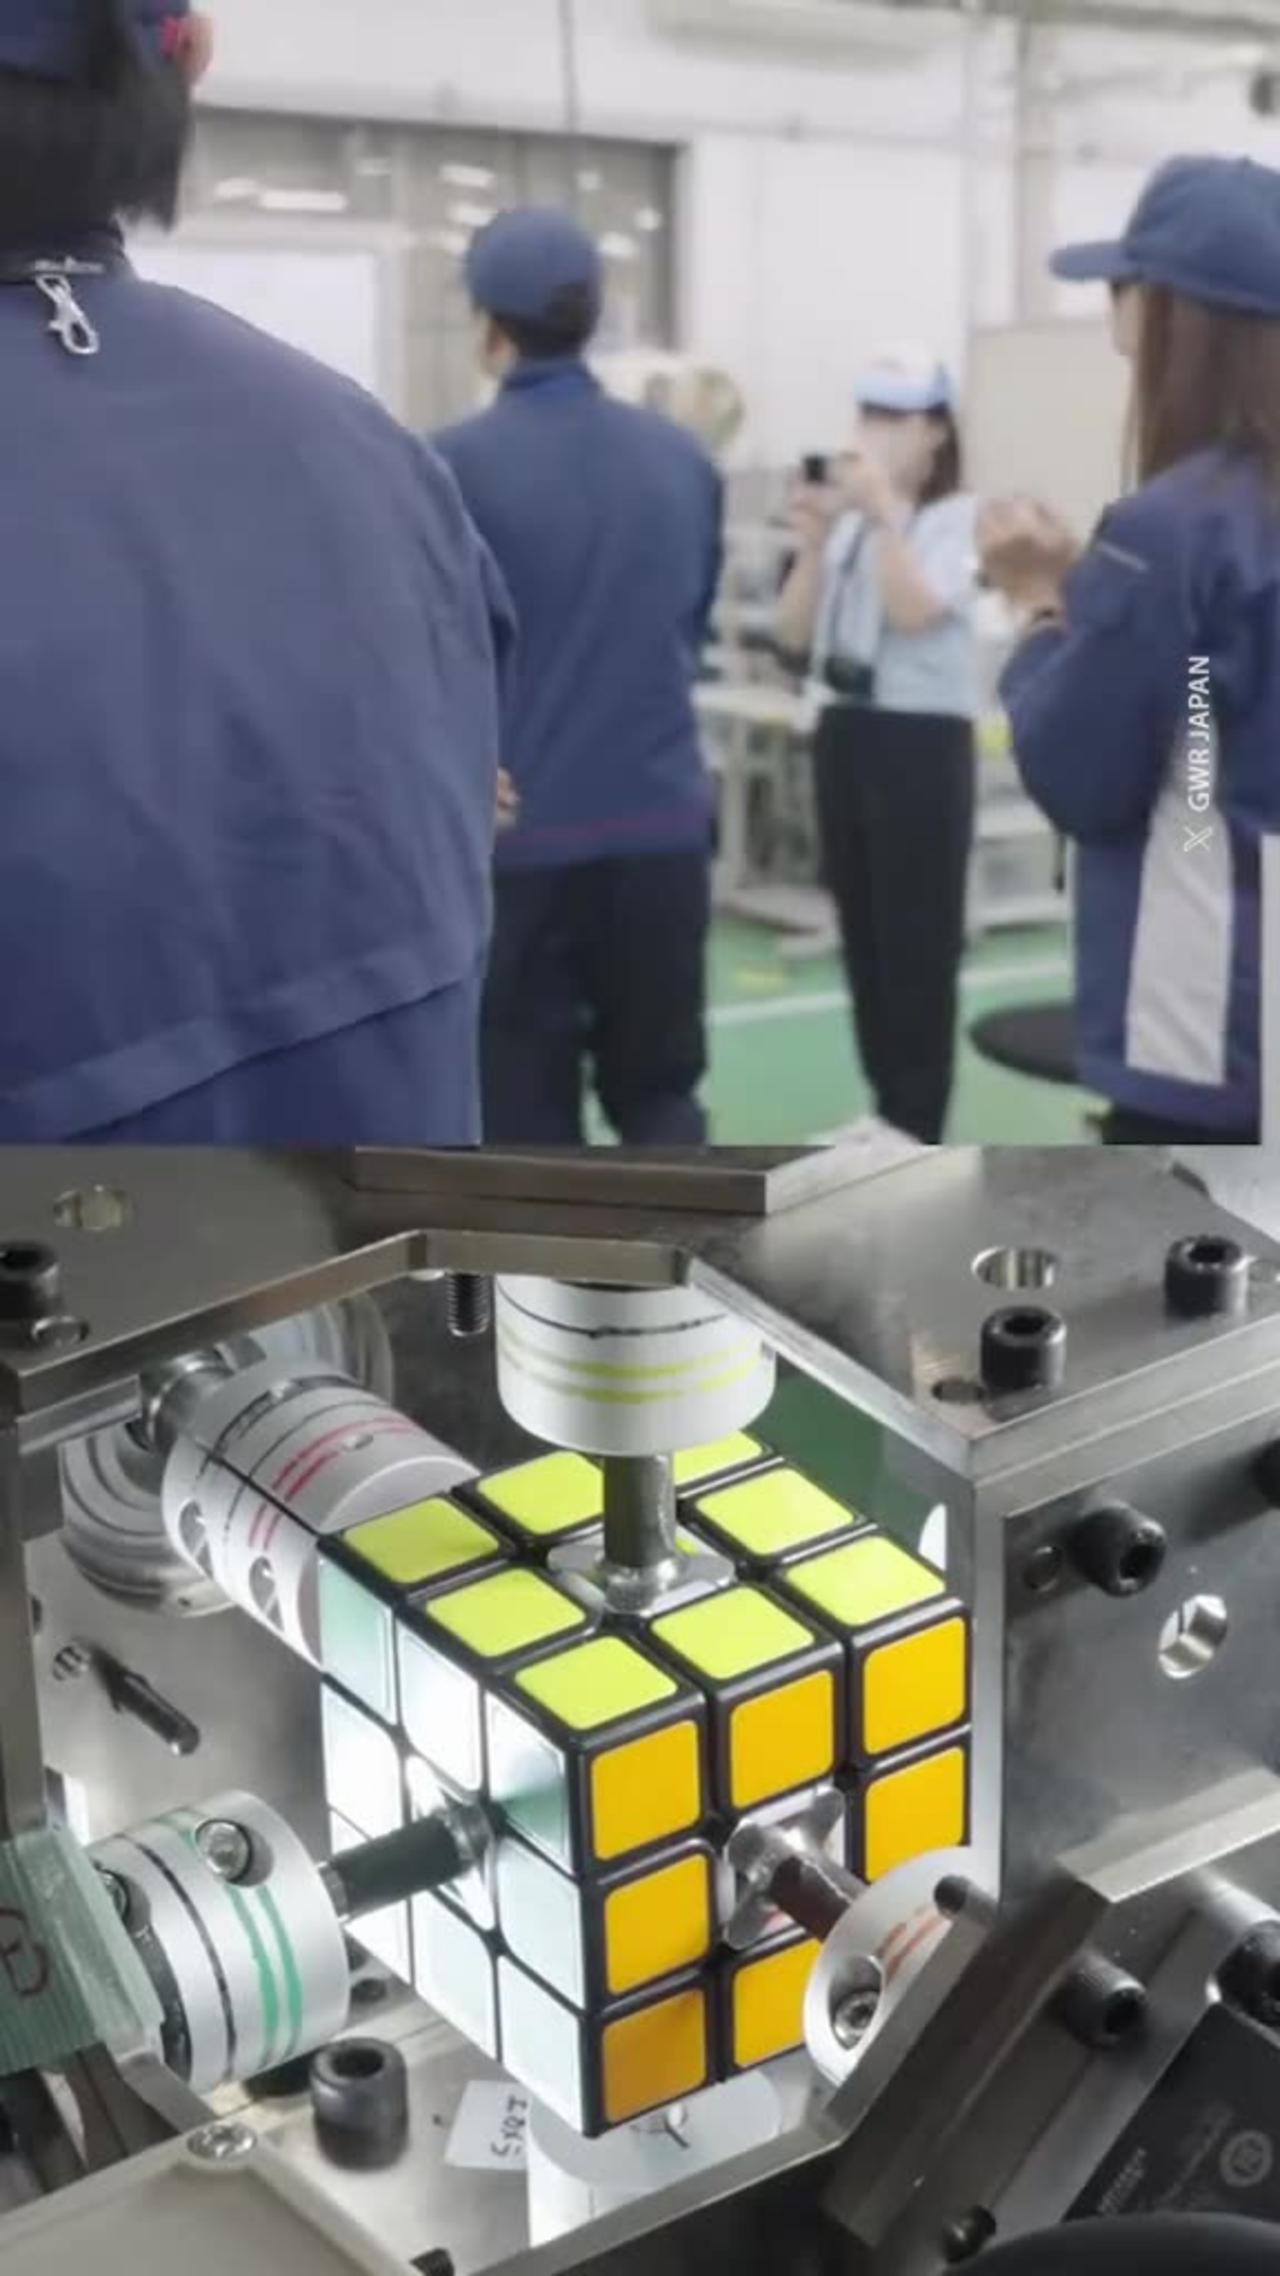 A robot solved the puzzle cube… in just 0.305 seconds 😳